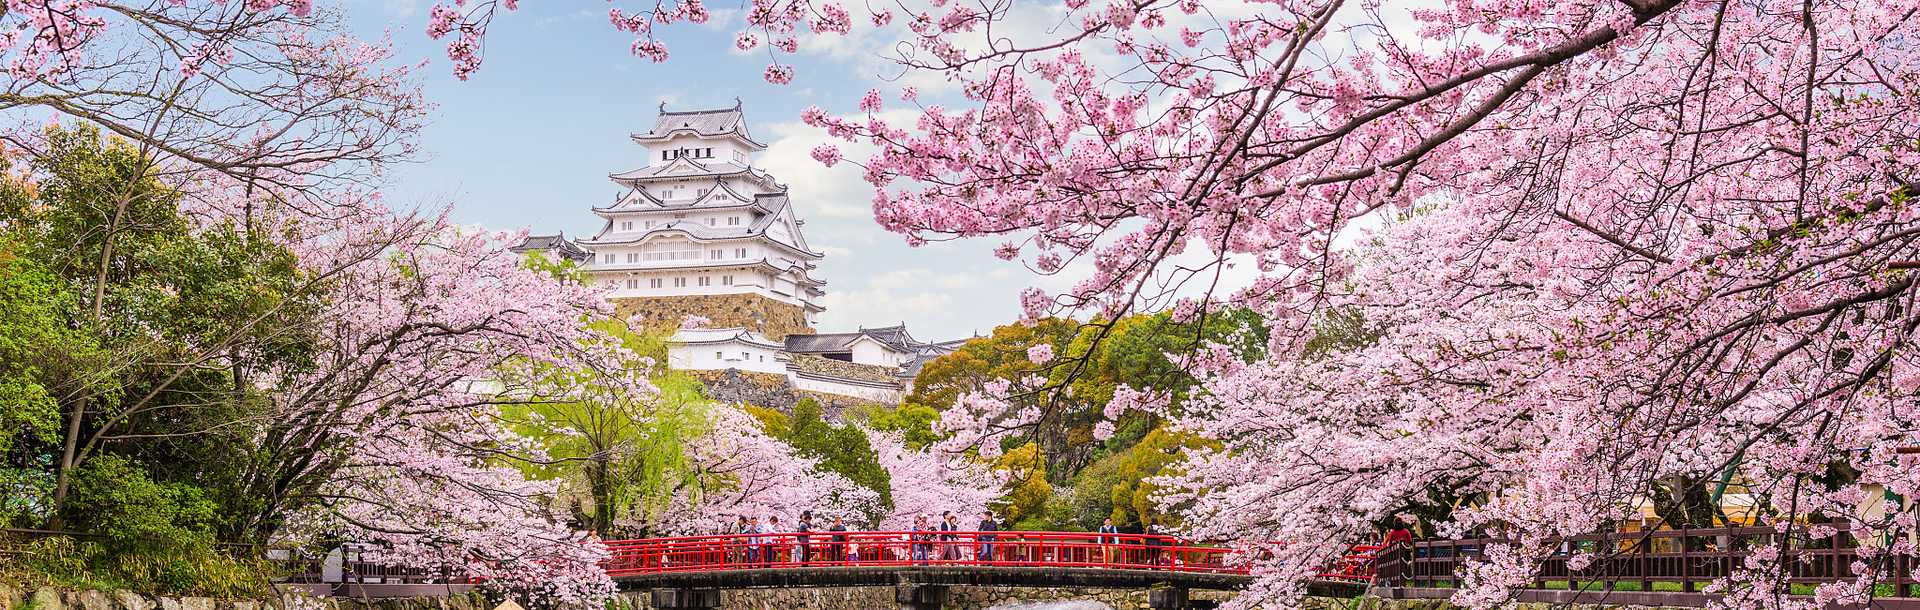 Himeji castle with blooming cherry blossom trees in Japan